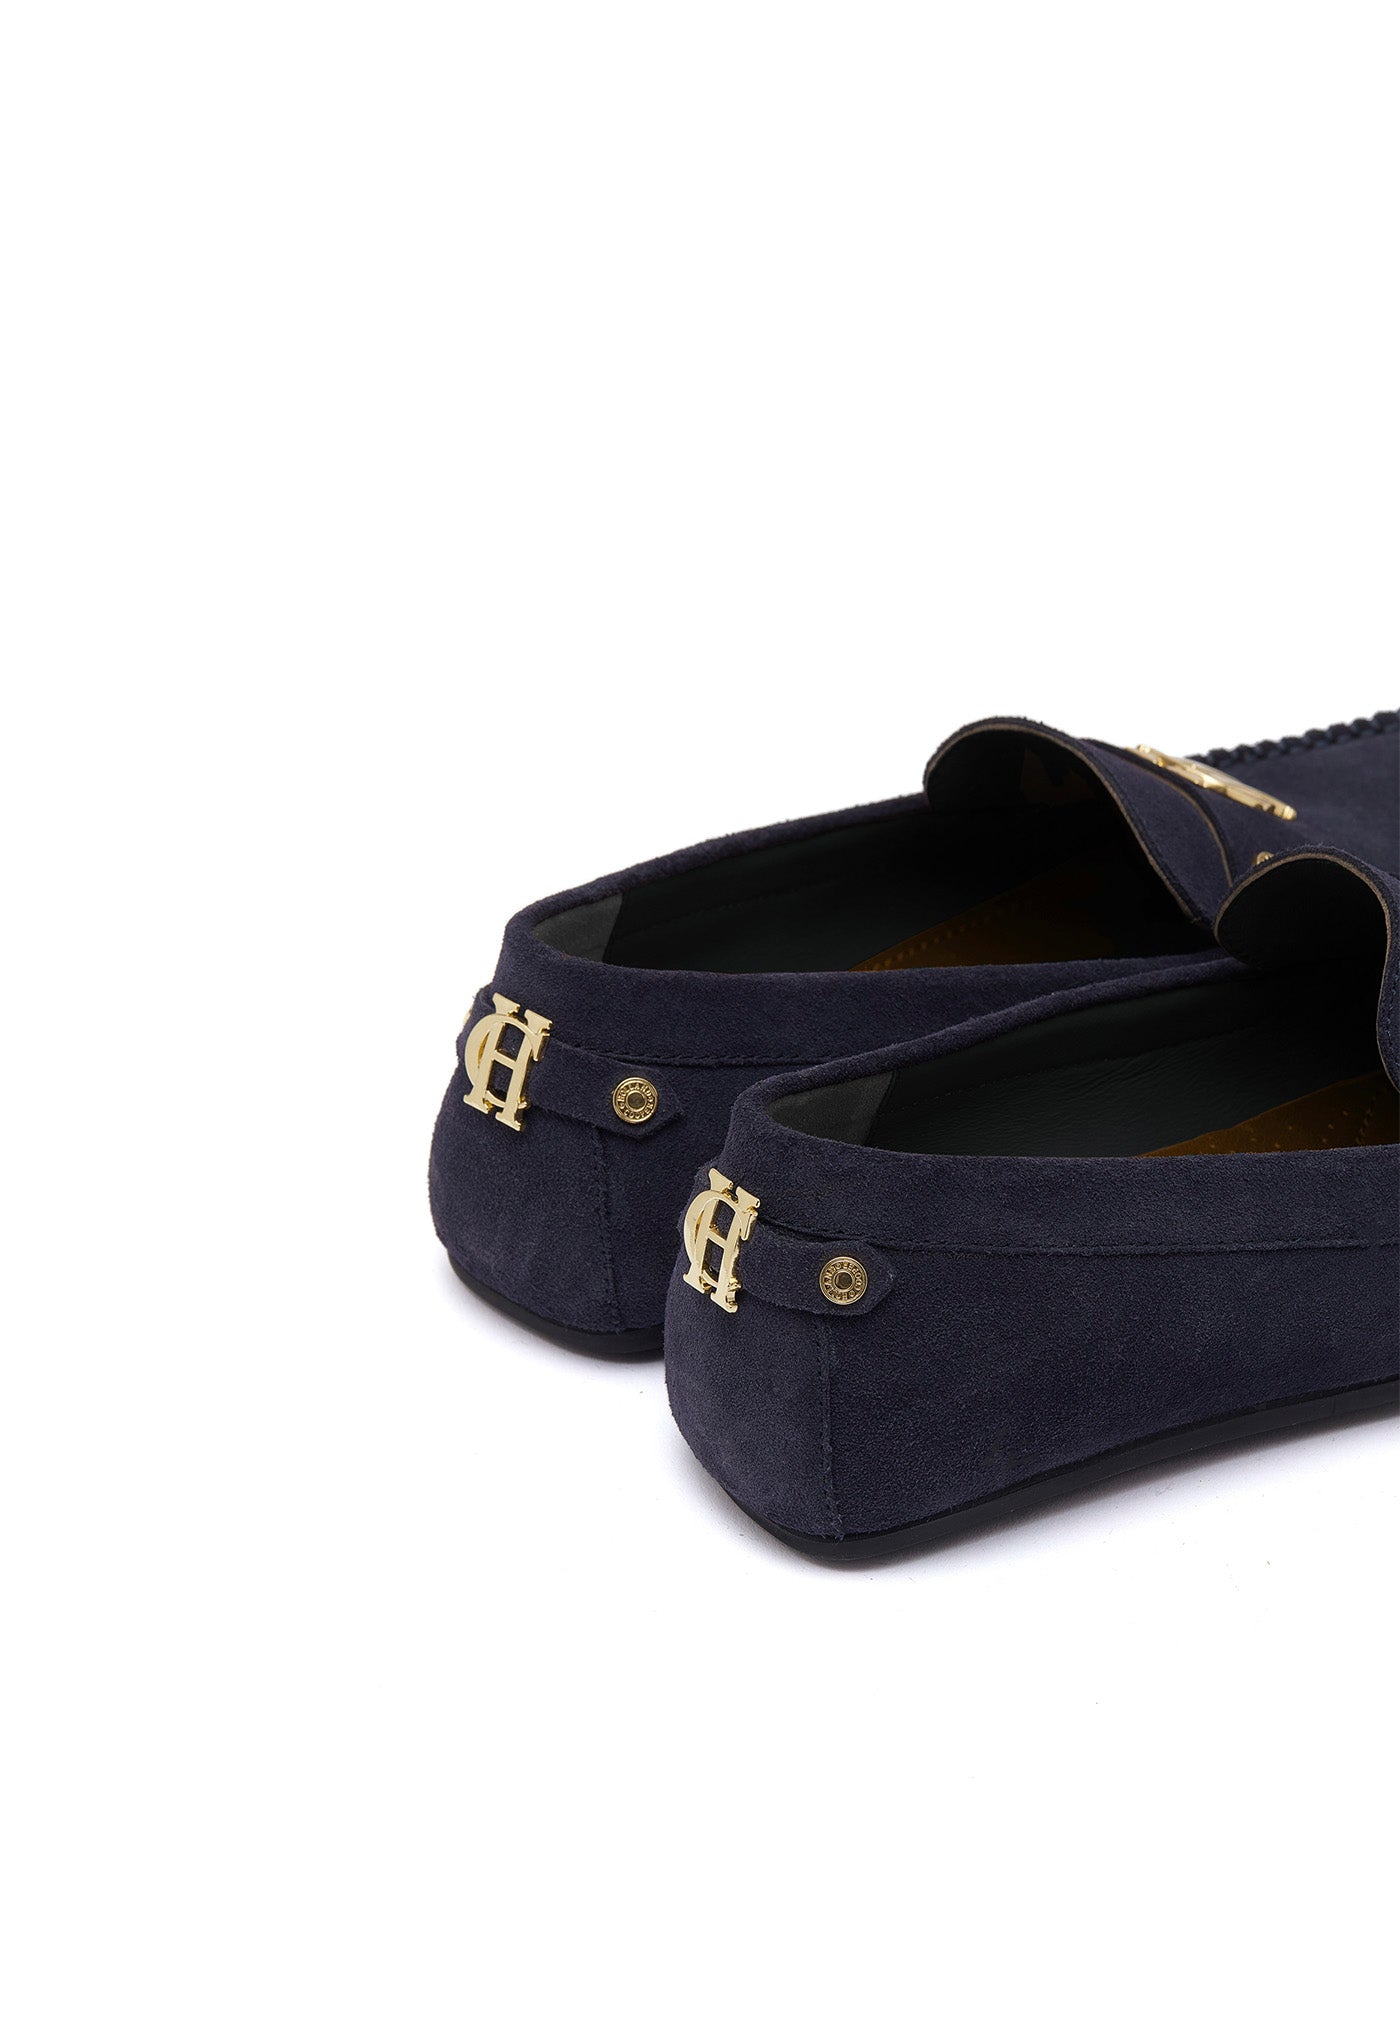 The Driving Loafer - Ink Navy sold by Angel Divine